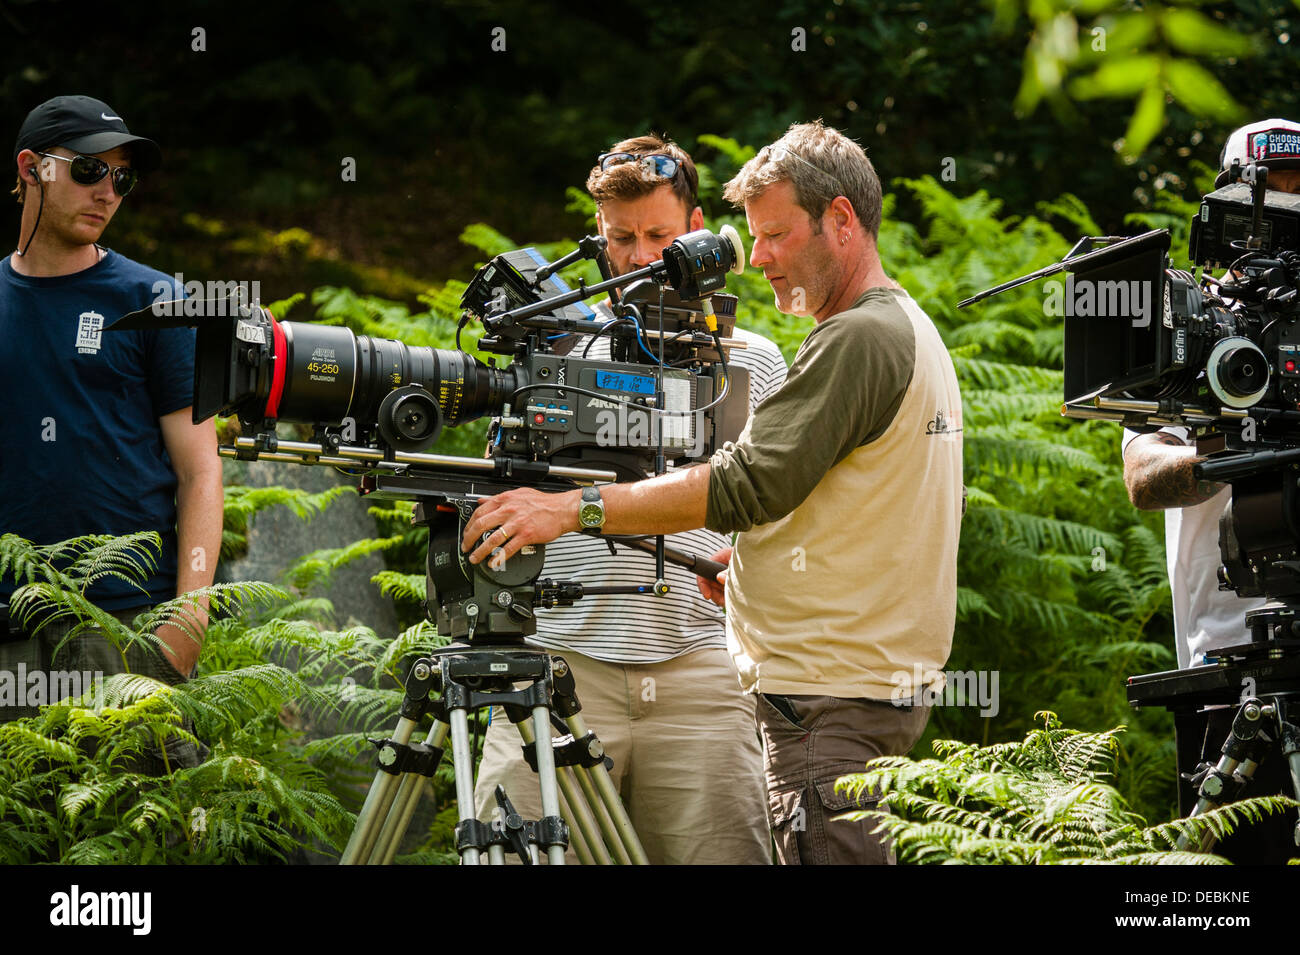 A camera crew on location filming using an Arri Alexa camera with a 45-250mm Alura zoom lens, UK Stock Photo